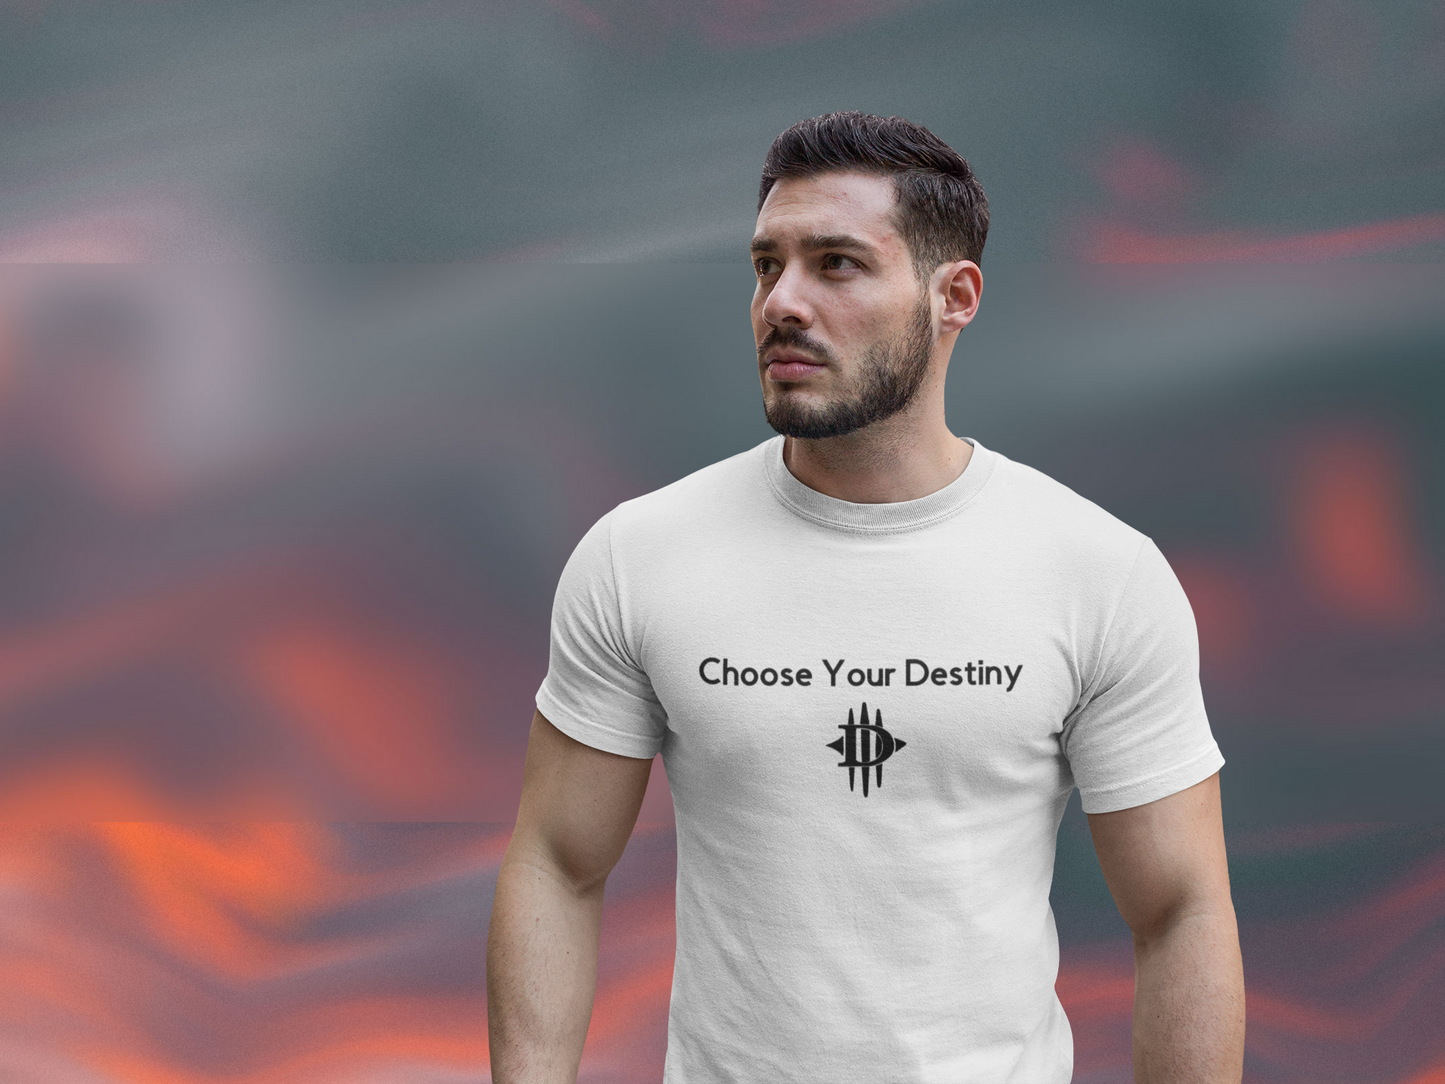 shirt for fans of the Diablo game